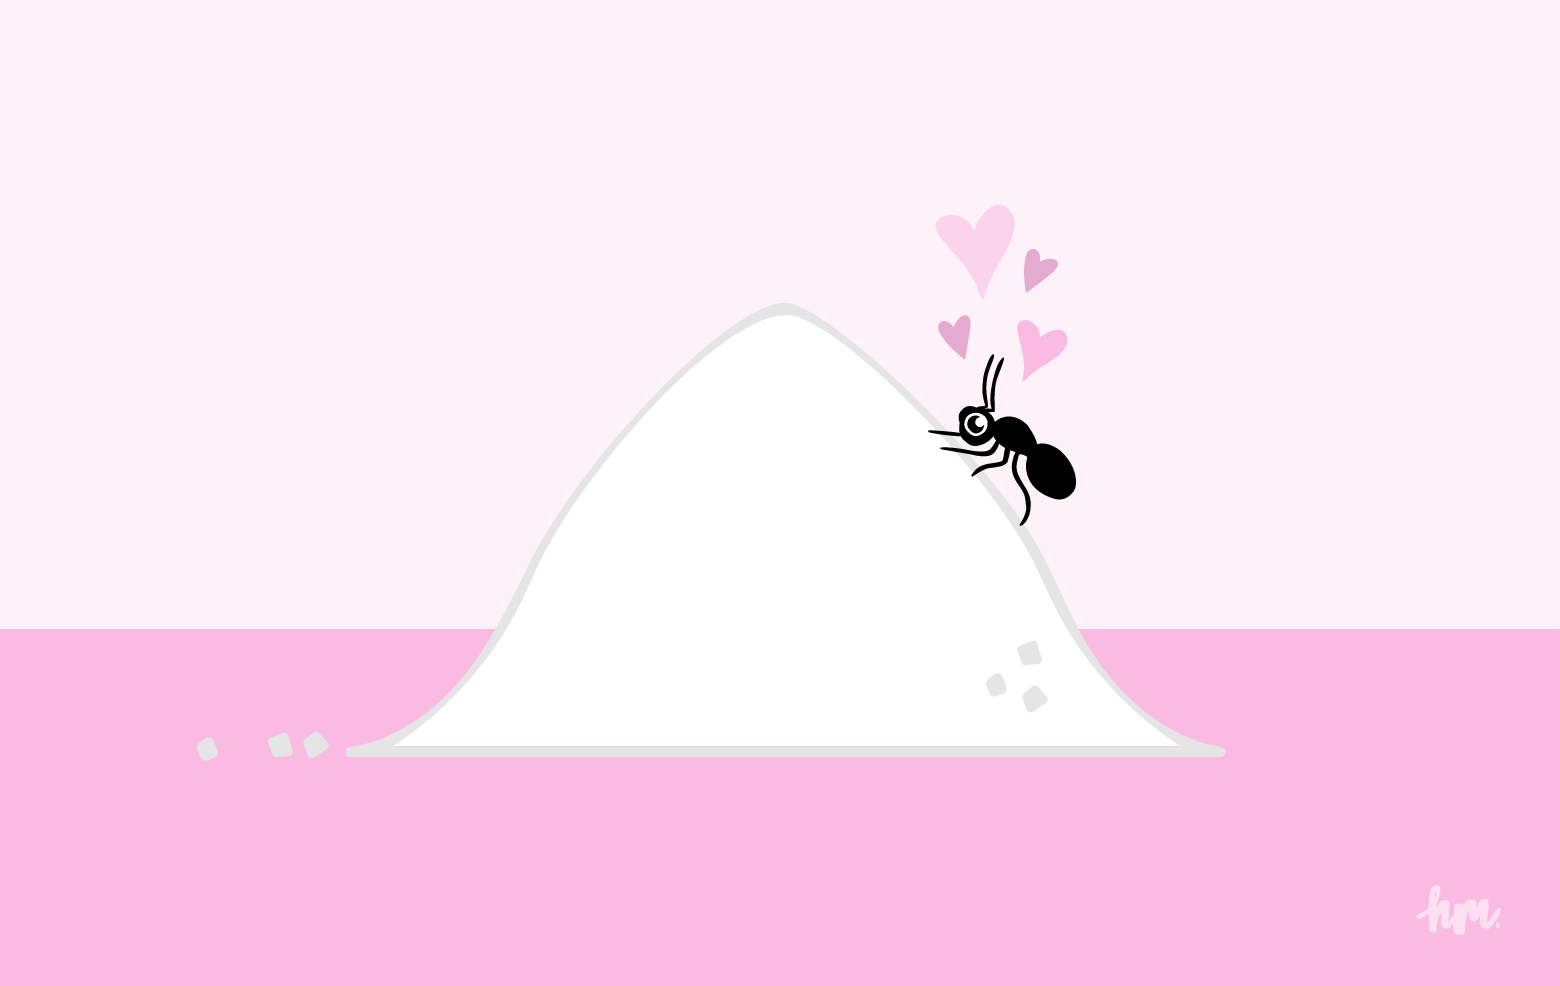 Illustration of an ant finding a sugar pile on the kitchen counter with pink hearts above the ant's head.